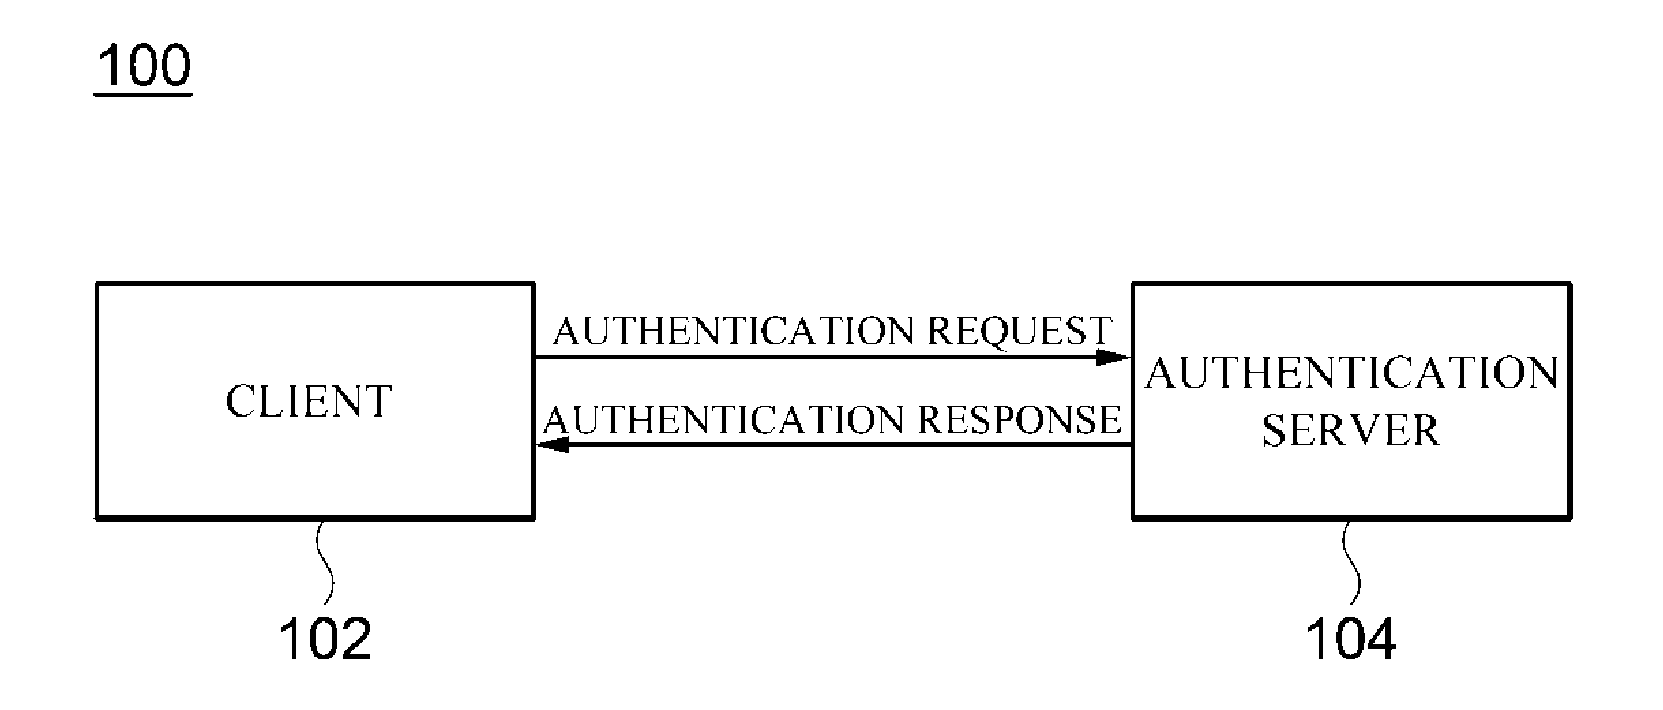 Otp-based authentication system and method